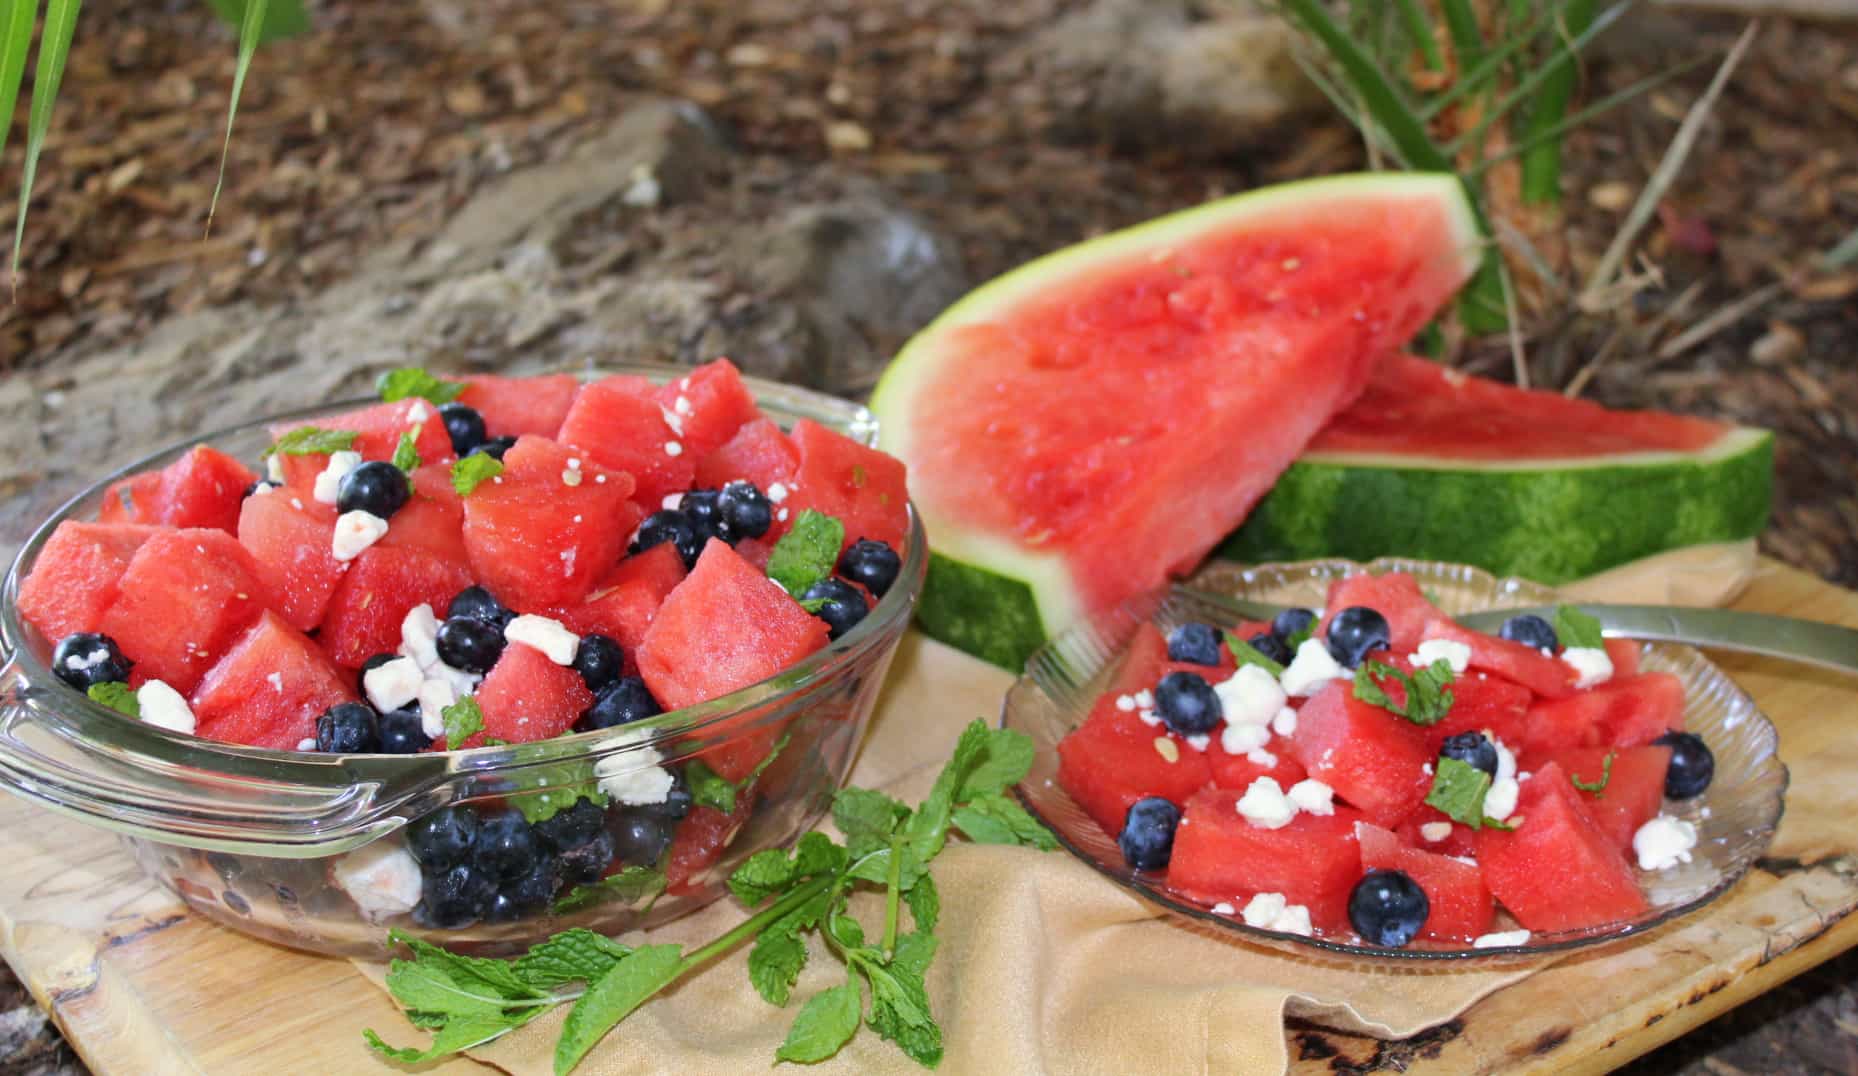 Watermelon Feta Salad with Blueberries – Summer is Here!